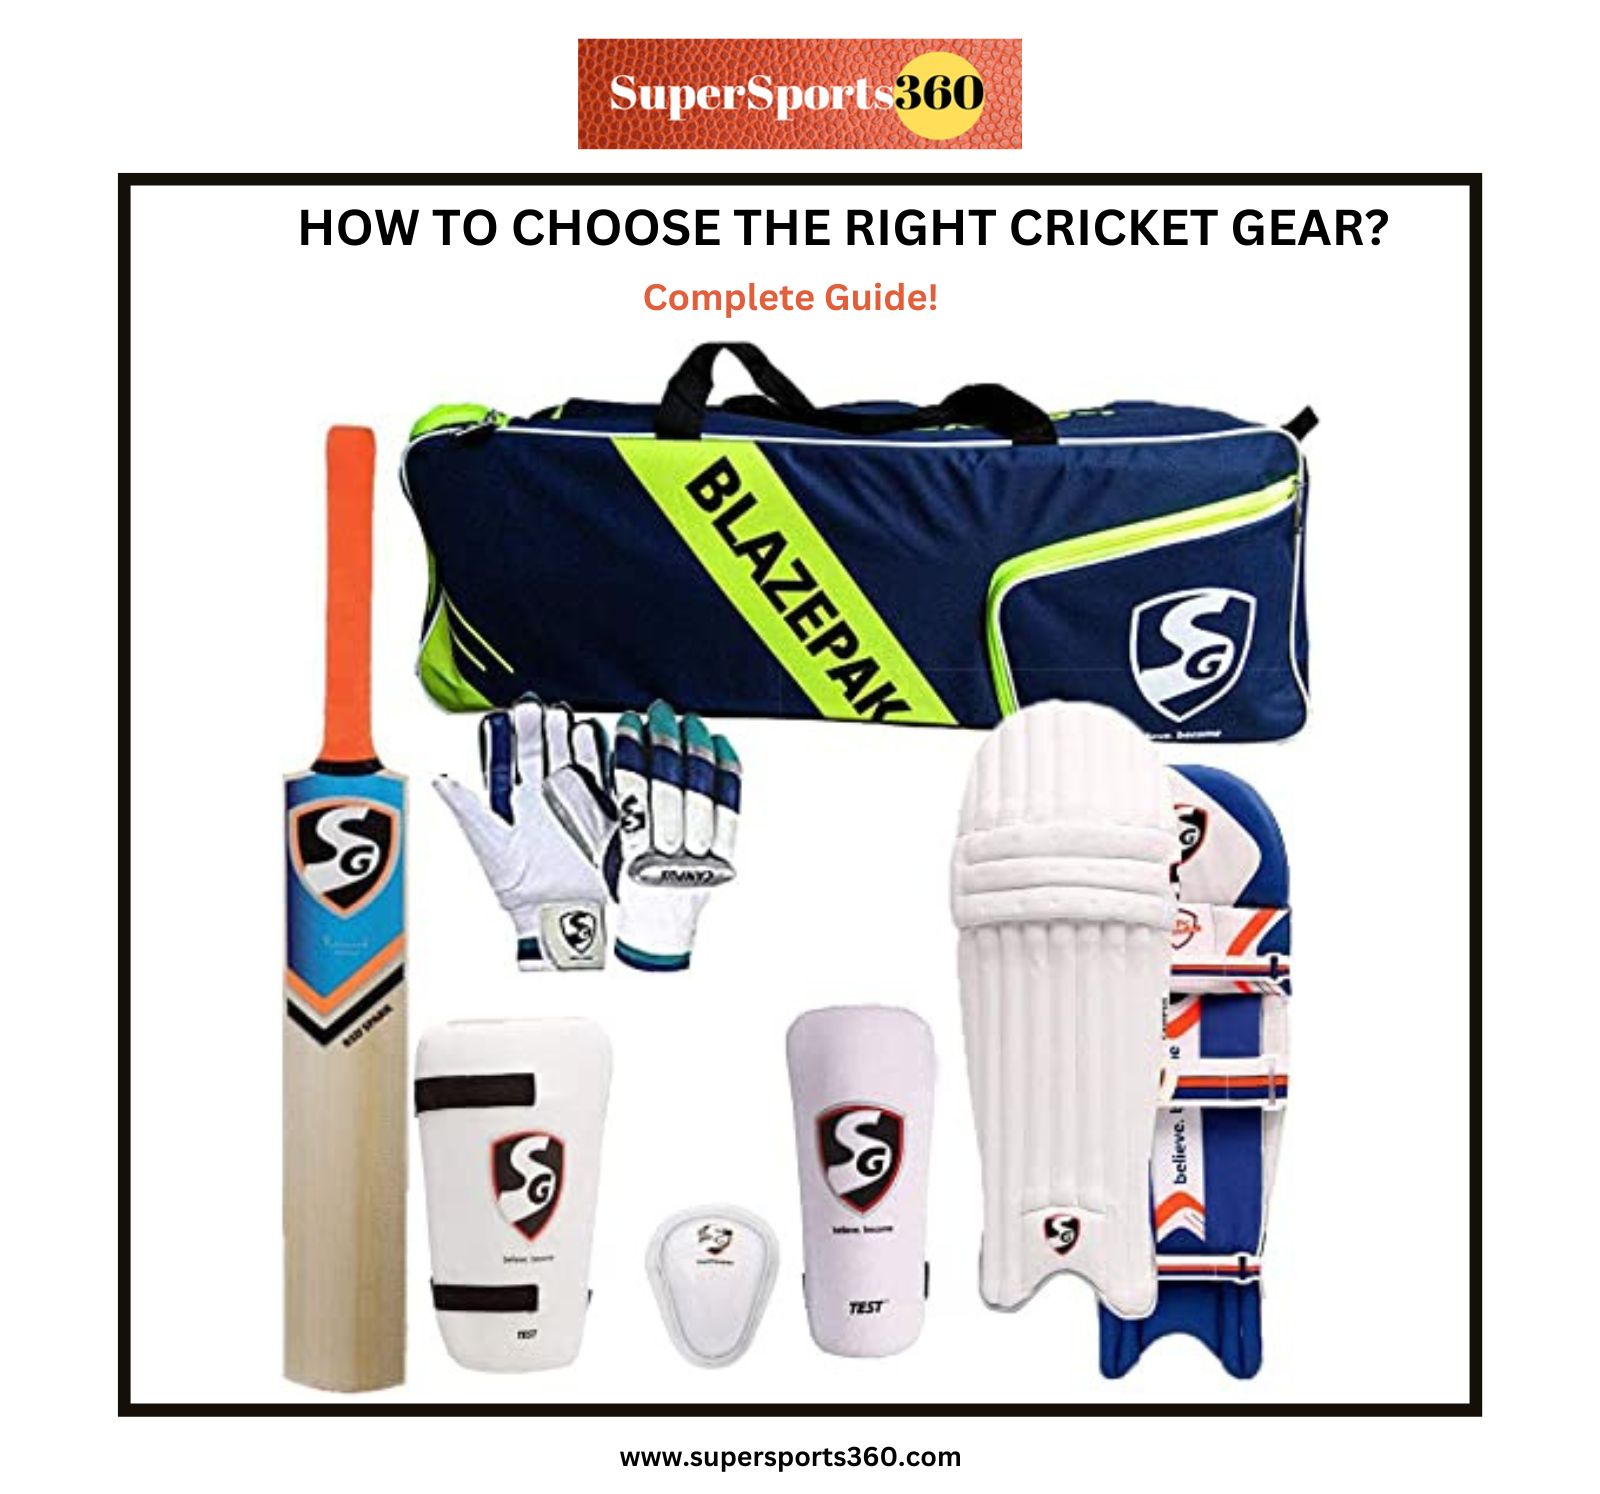 HOW TO CHOOSE THE RIGHT CRICKET GEAR